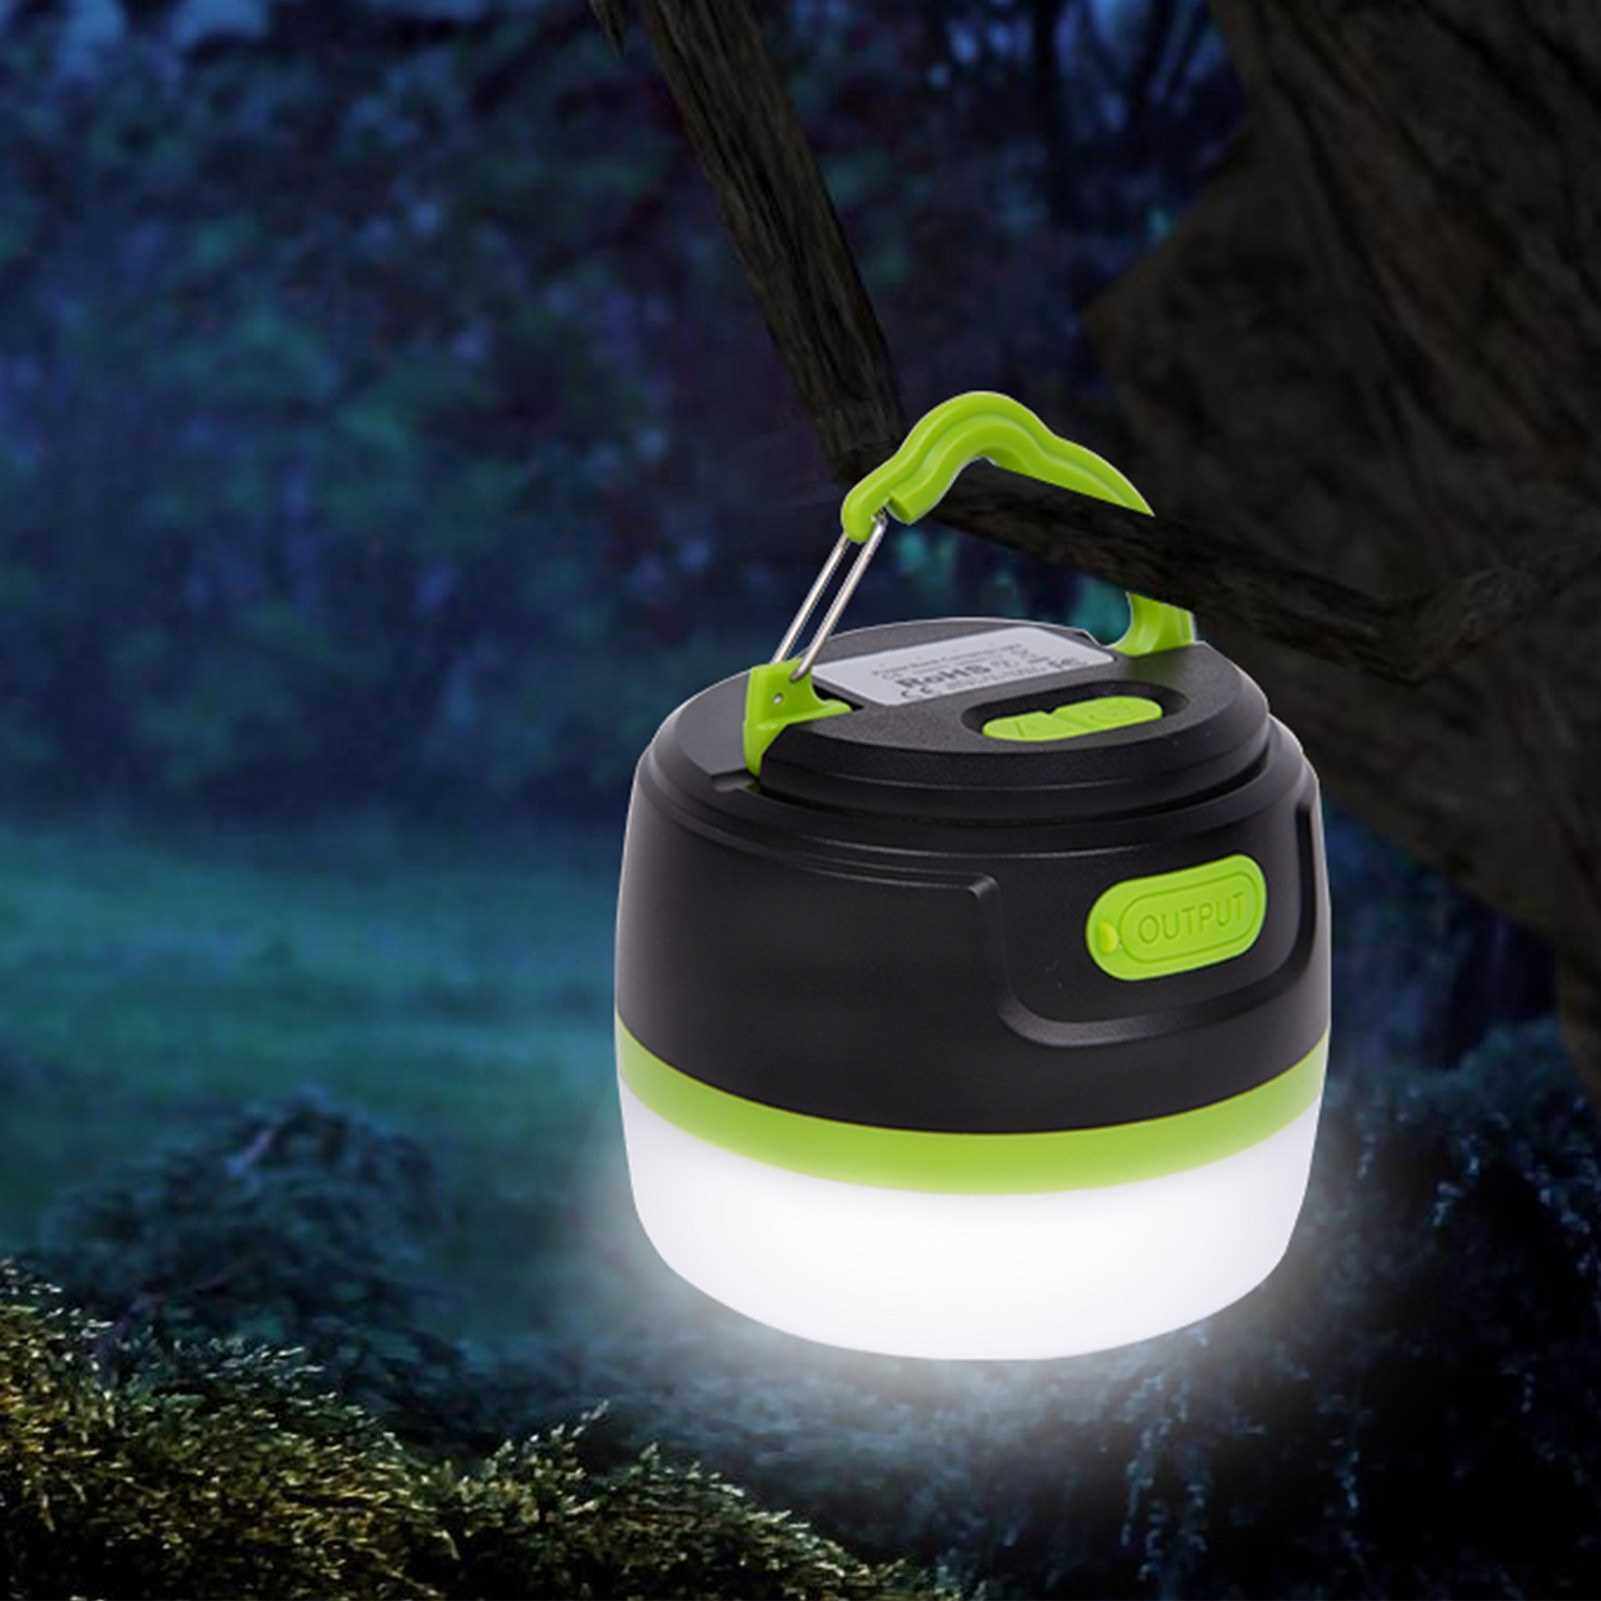 Best Selling Rechargeable LED Camping Lantern Portable USB Camping Tent Light Power Bank 5200mAh 3 in 1 Design IP65 waterproof Magnet Base 5 Light Modes - Survival Kit for Emergency Hurricane Power Outage (Standard)